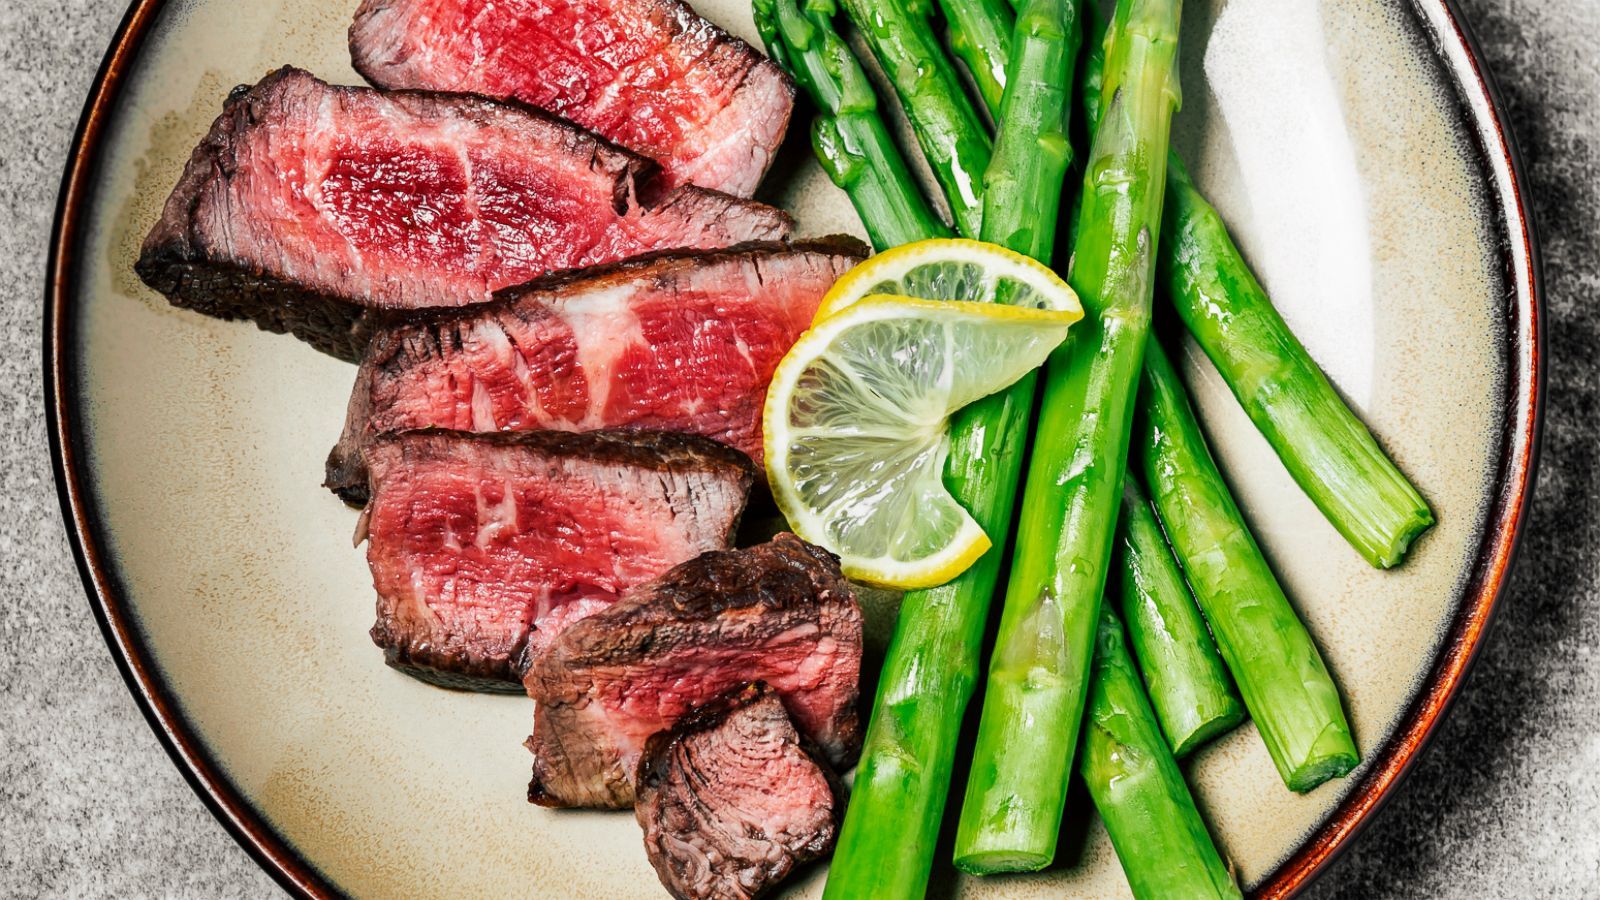 Going 'keto'? Here's everything to know about the trendy ketogenic diet